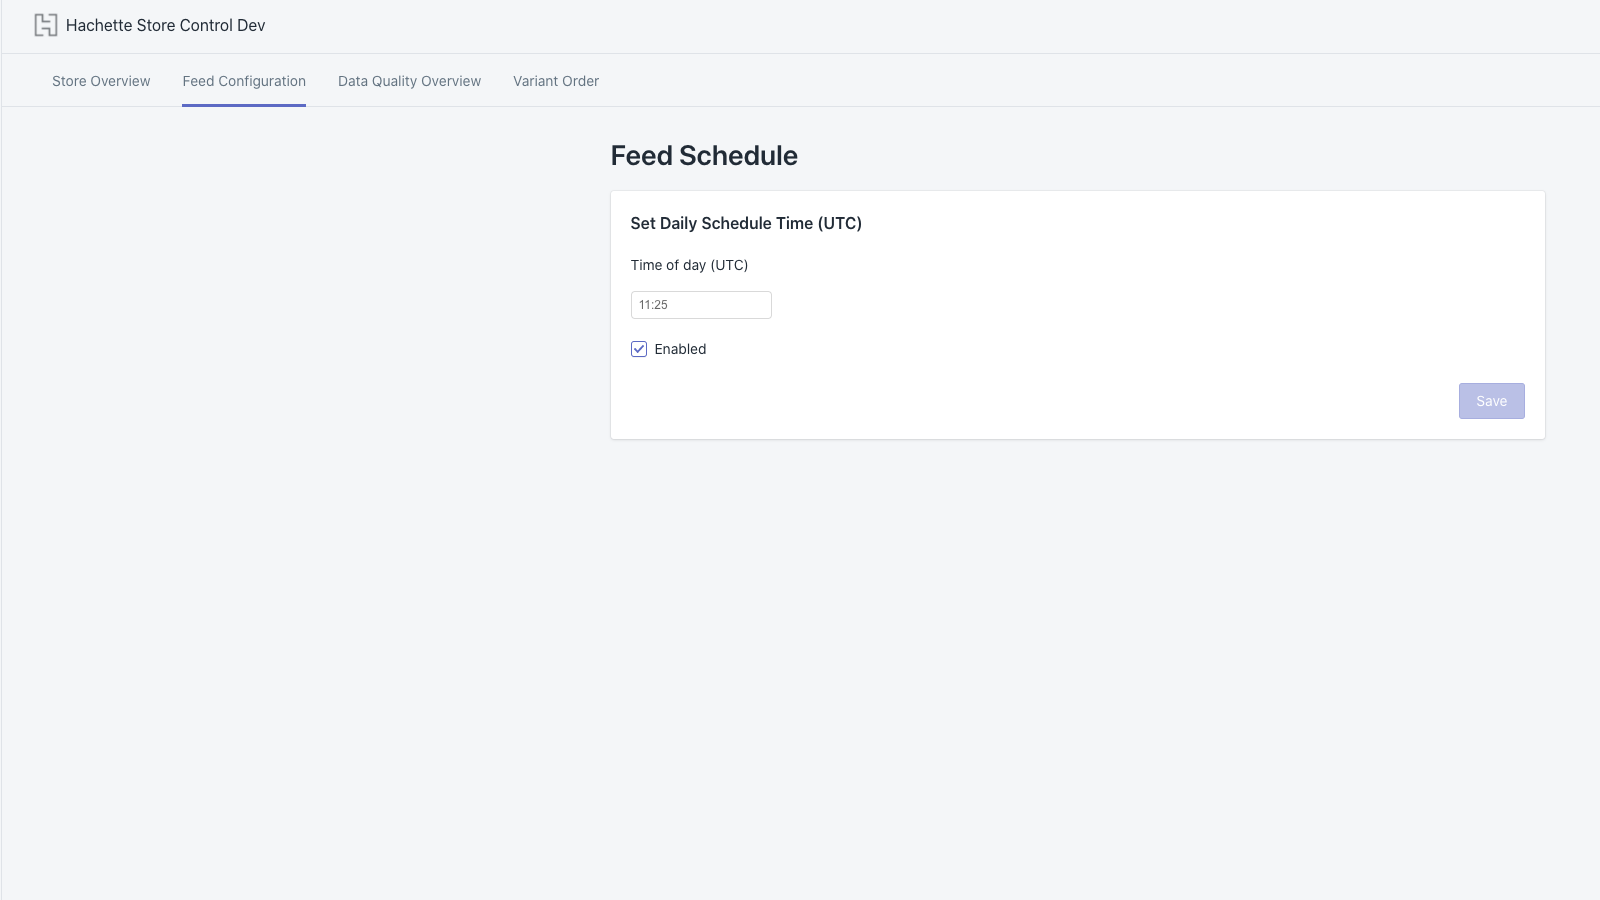 Feed Schedule